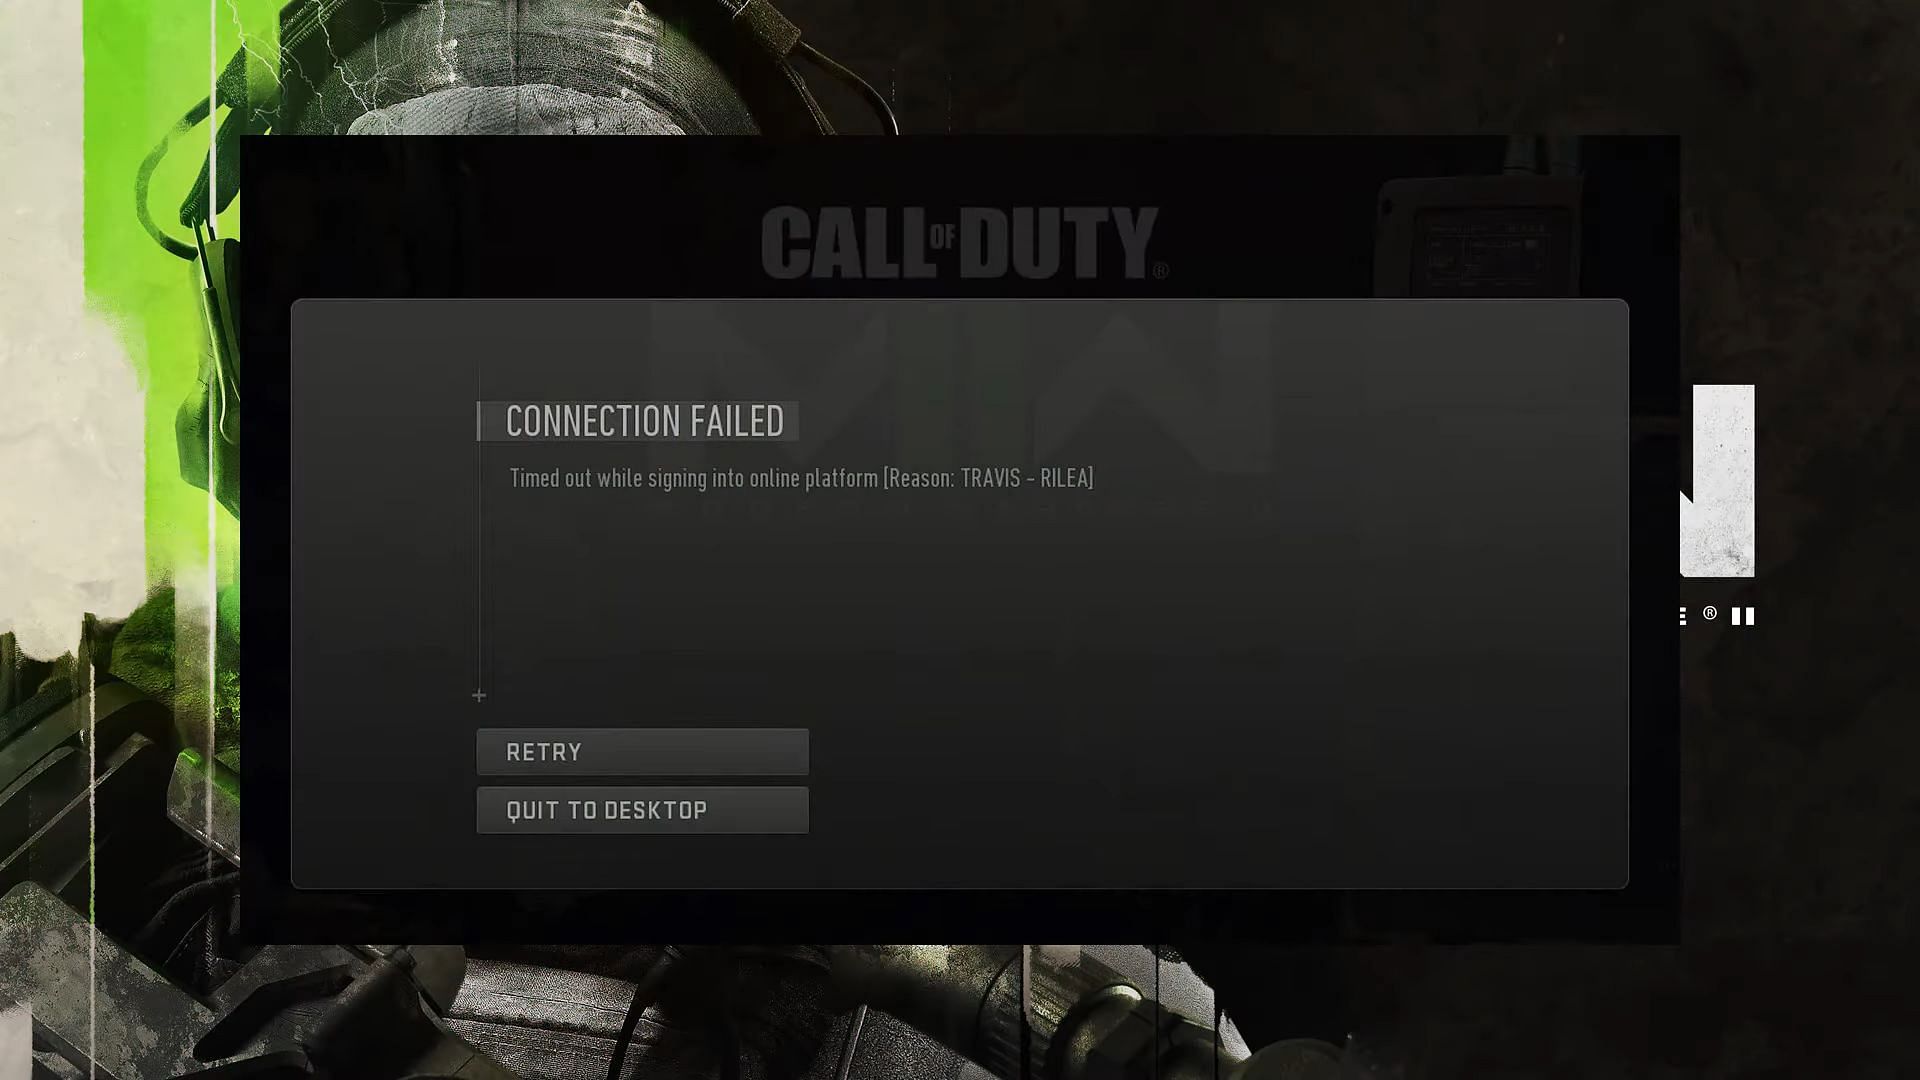 Warzone 2 error codes, and how to fix them in Modern Warfare 2